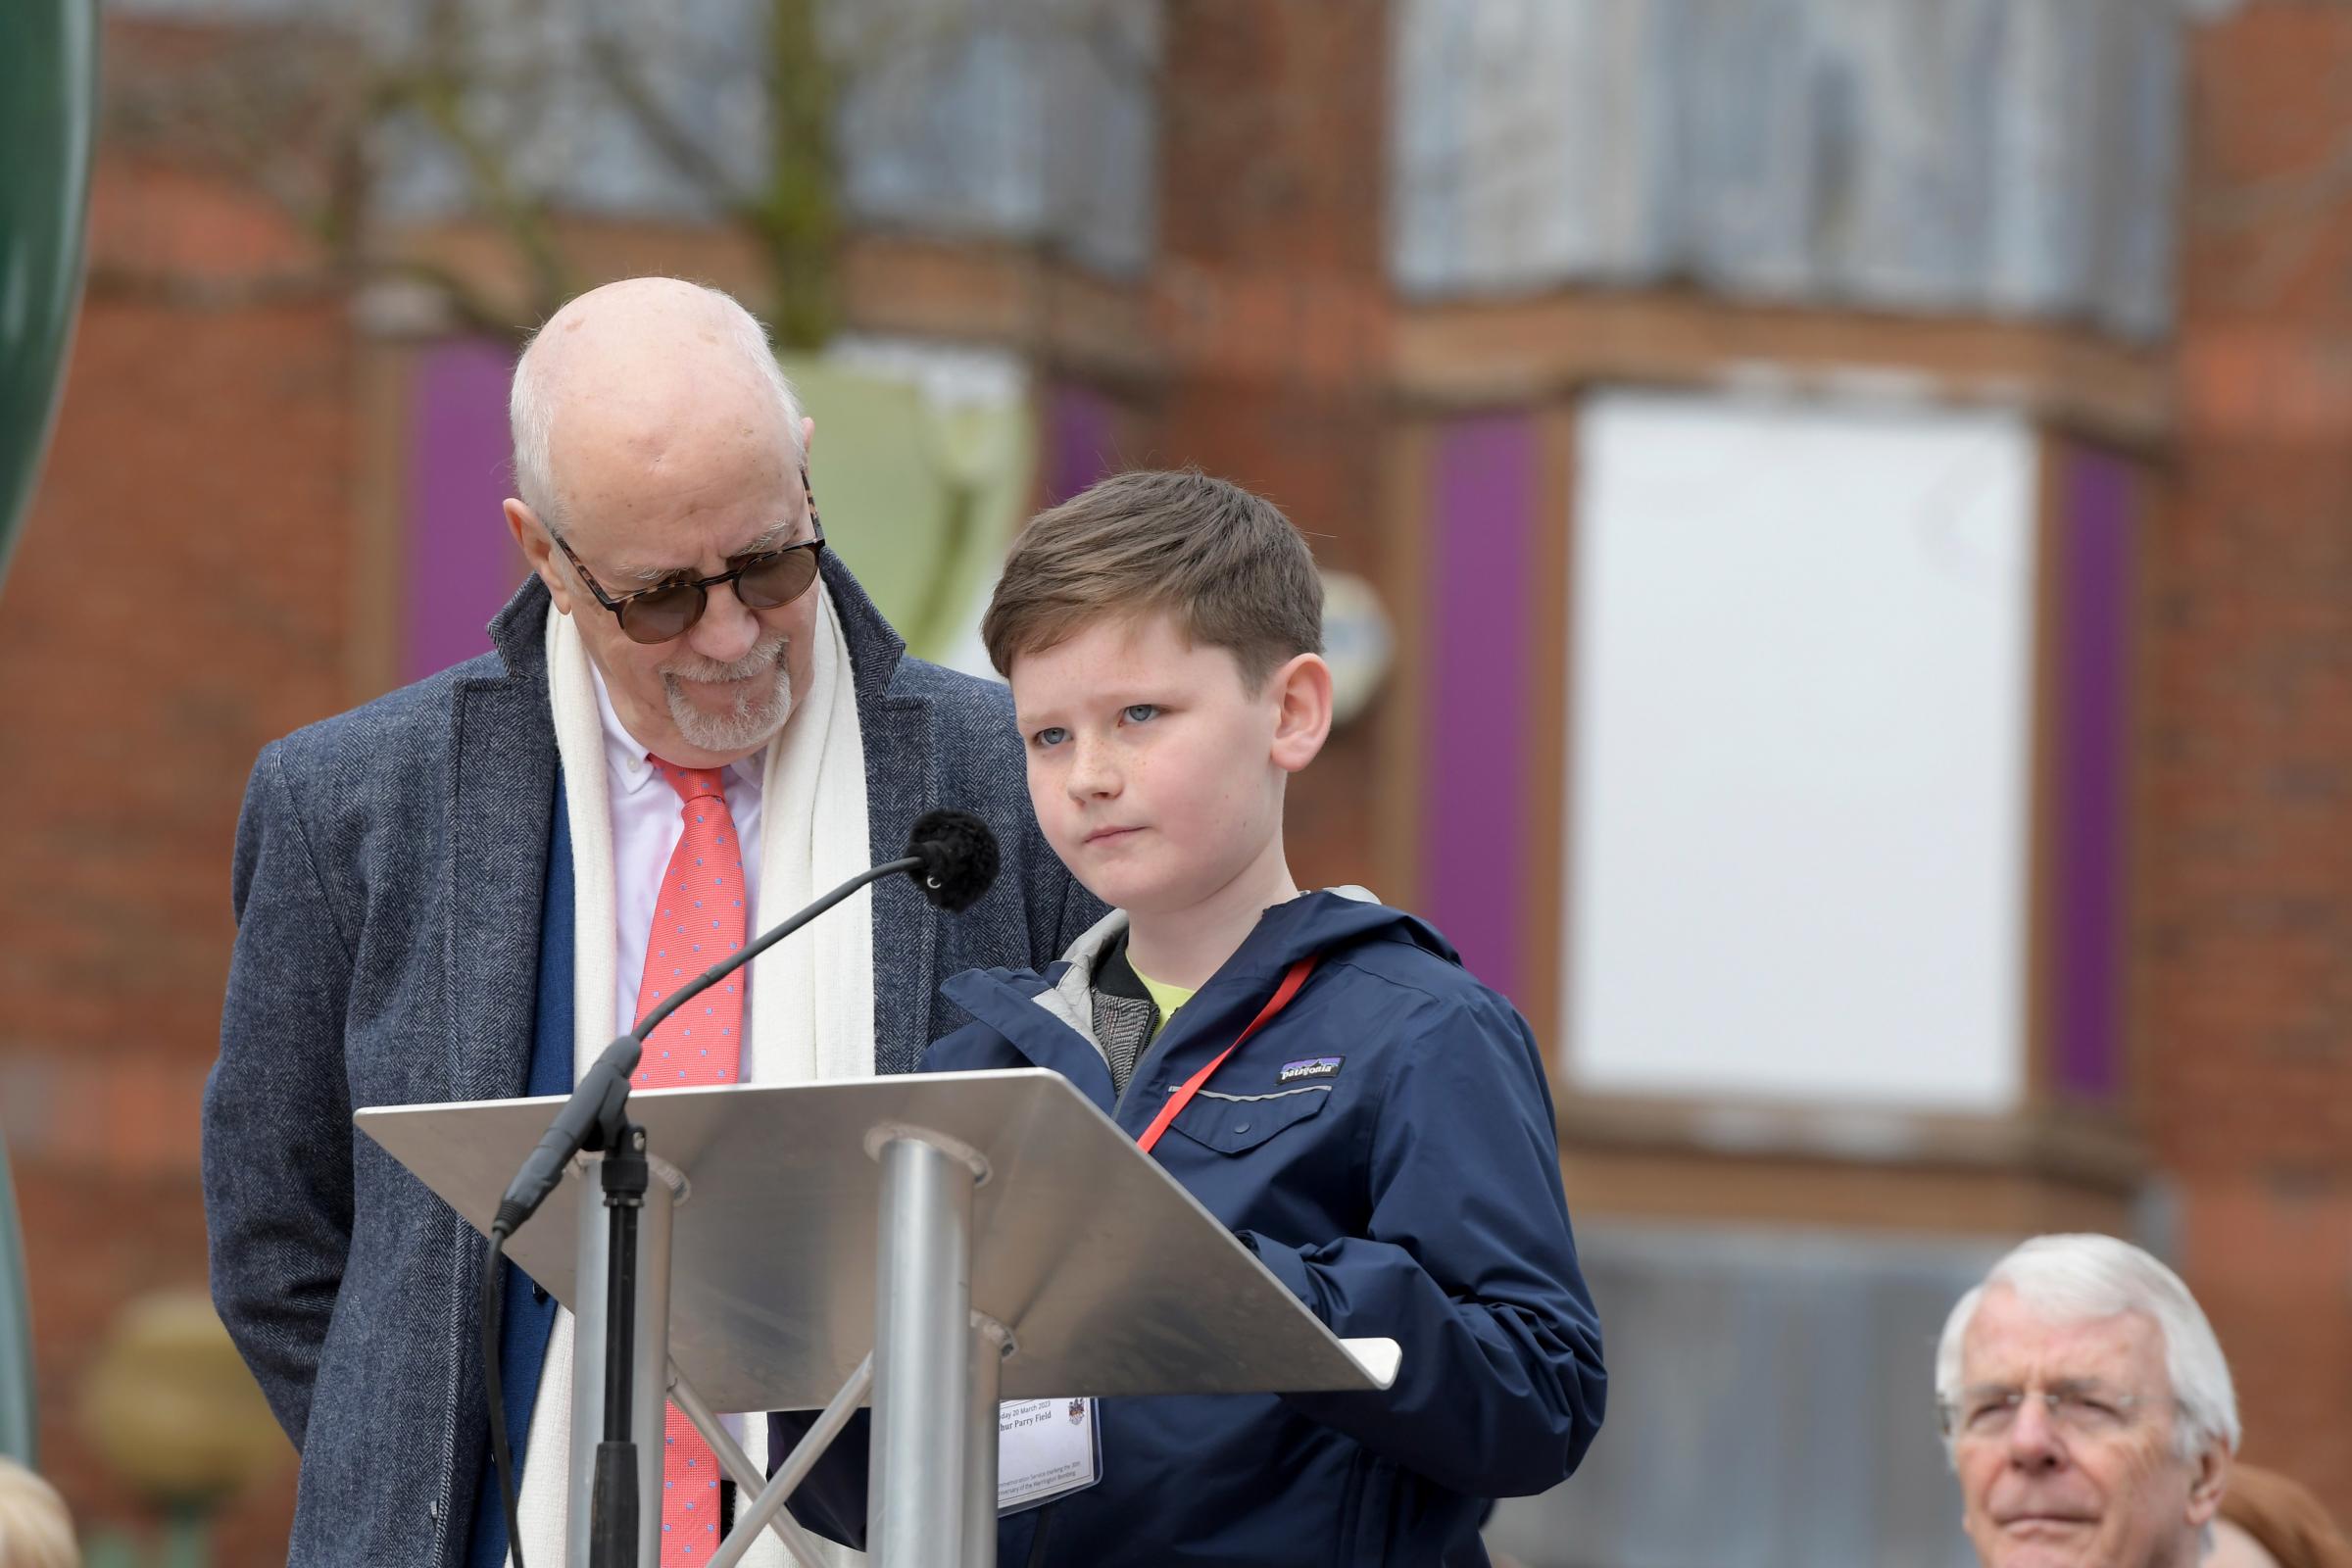 Arthur Parry delivered a speech in memory of his Uncle Tim